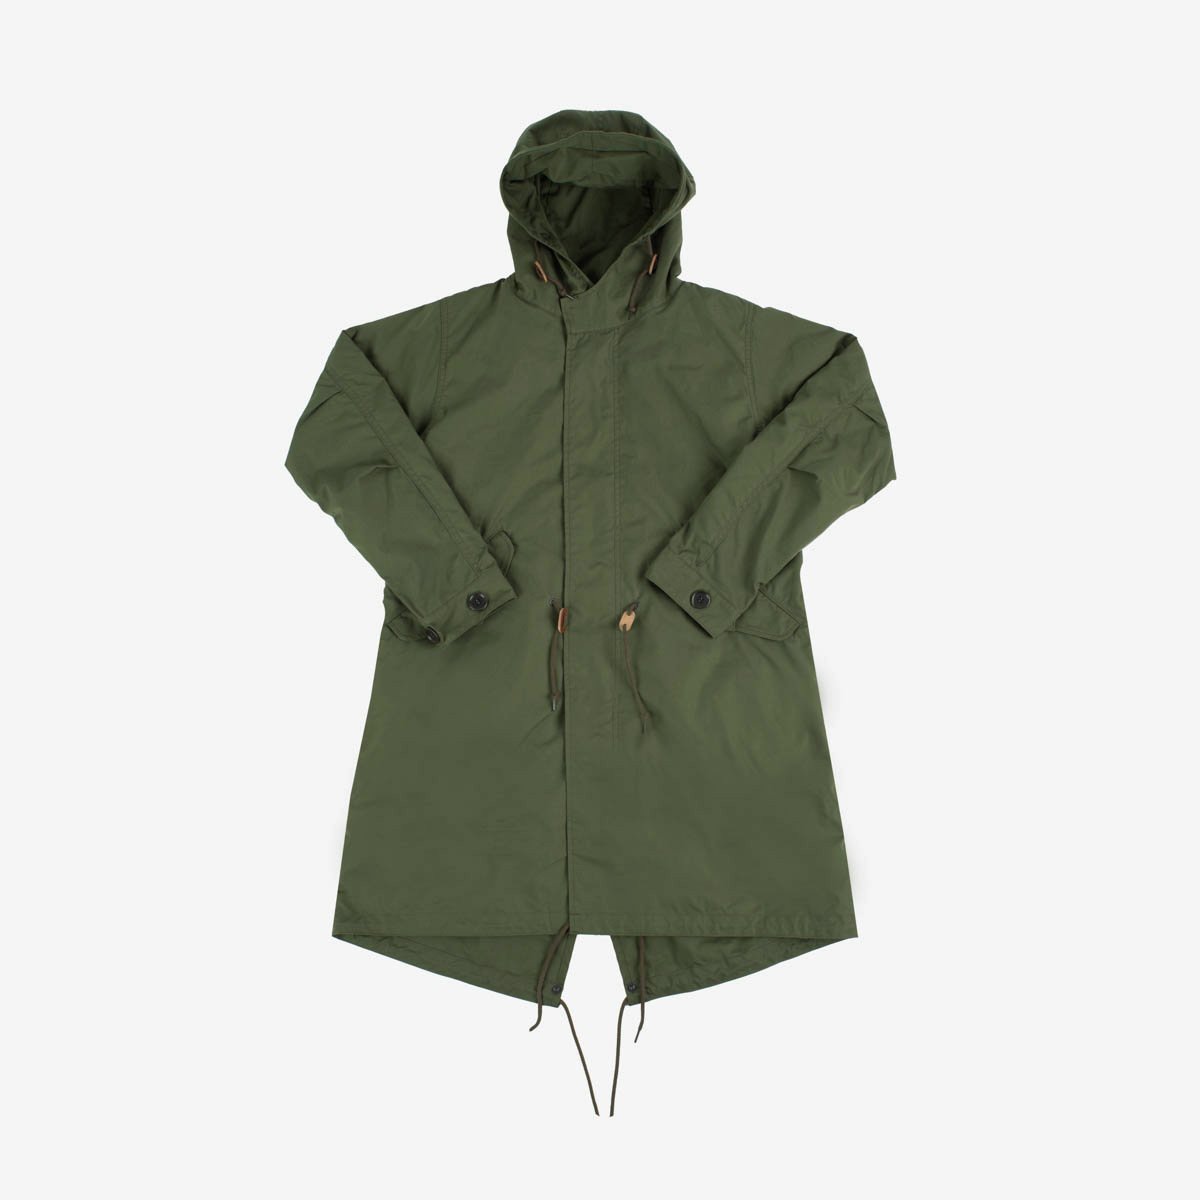 5oz Quilted Lining M-51 Type Field Coat - Olive